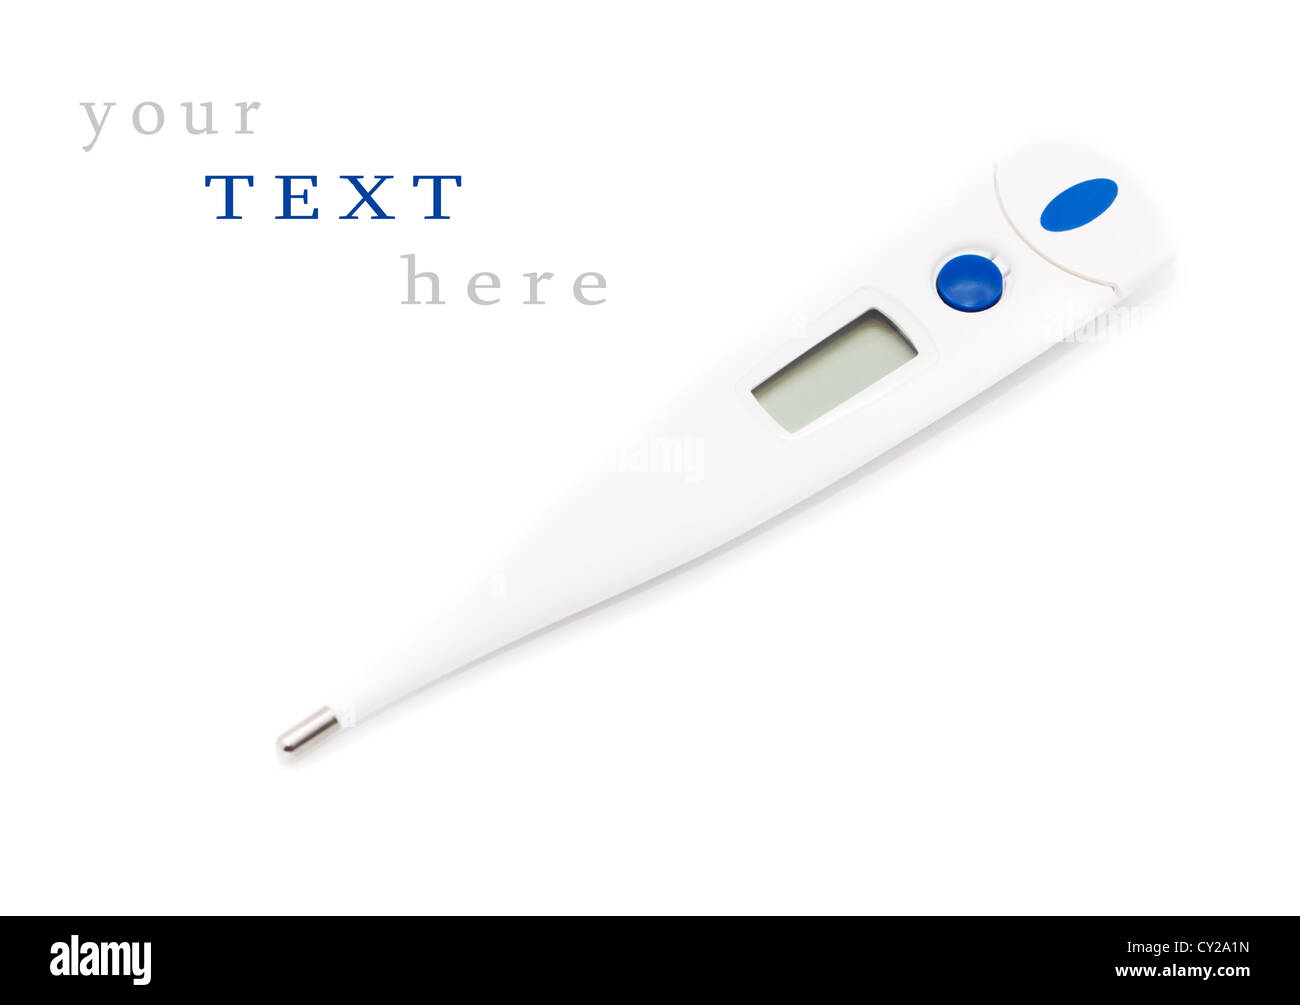 Digital thermometer isolated on the white background (with sample text) Stock Photo